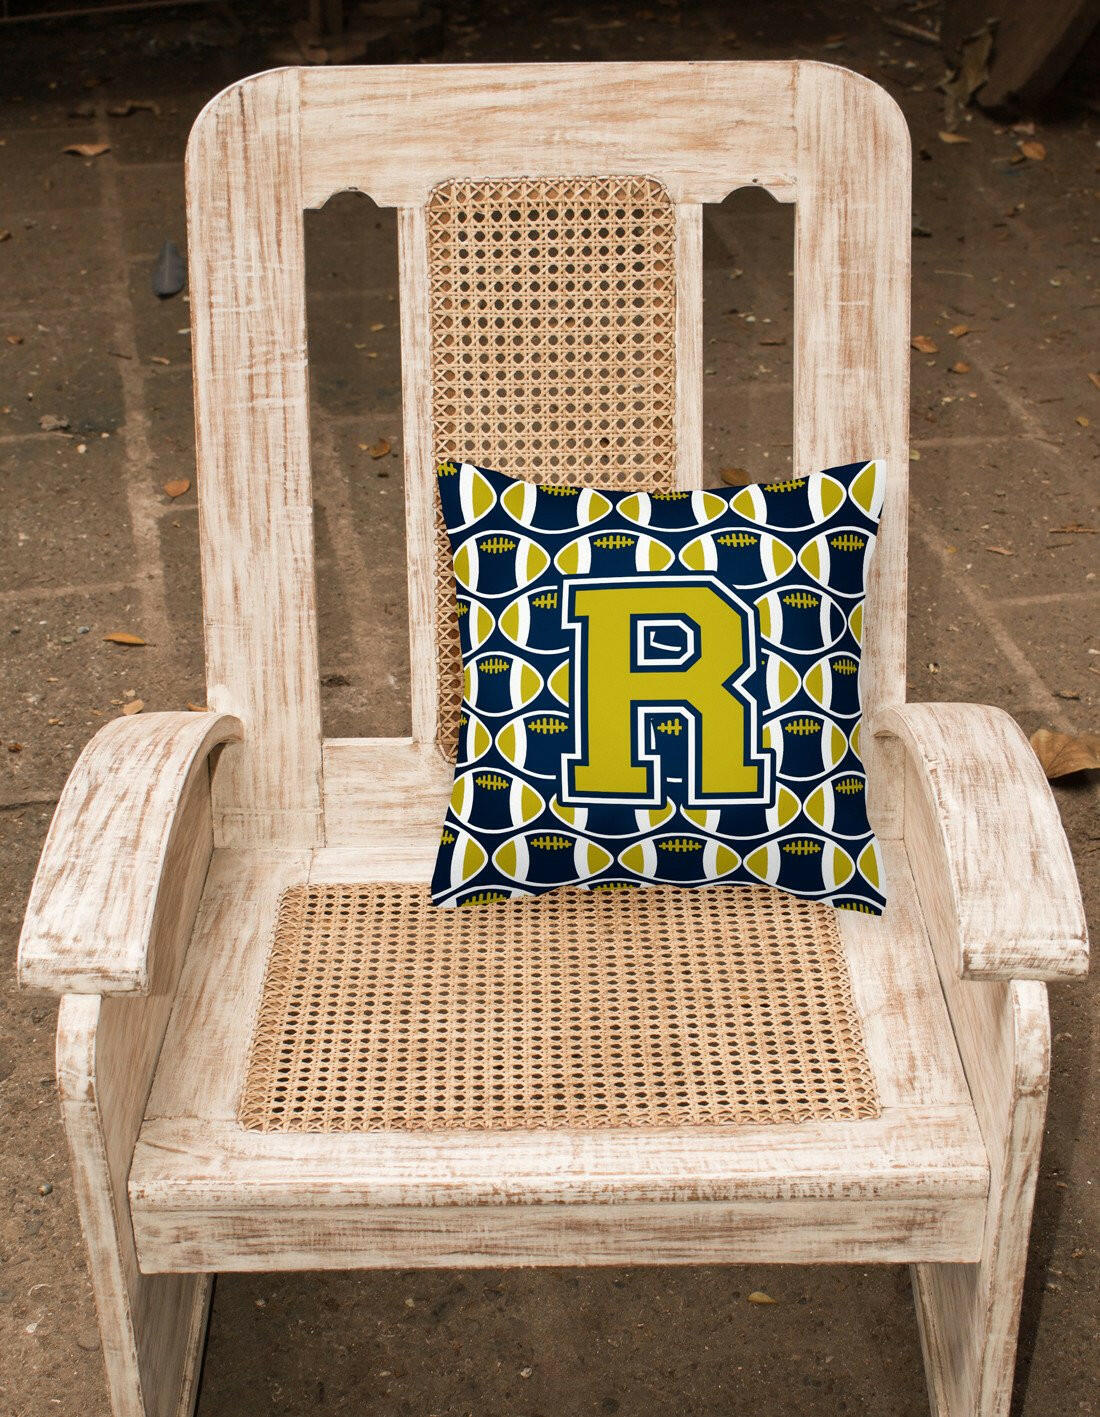 Letter R Football Blue and Gold Fabric Decorative Pillow CJ1074-RPW1414 by Caroline's Treasures